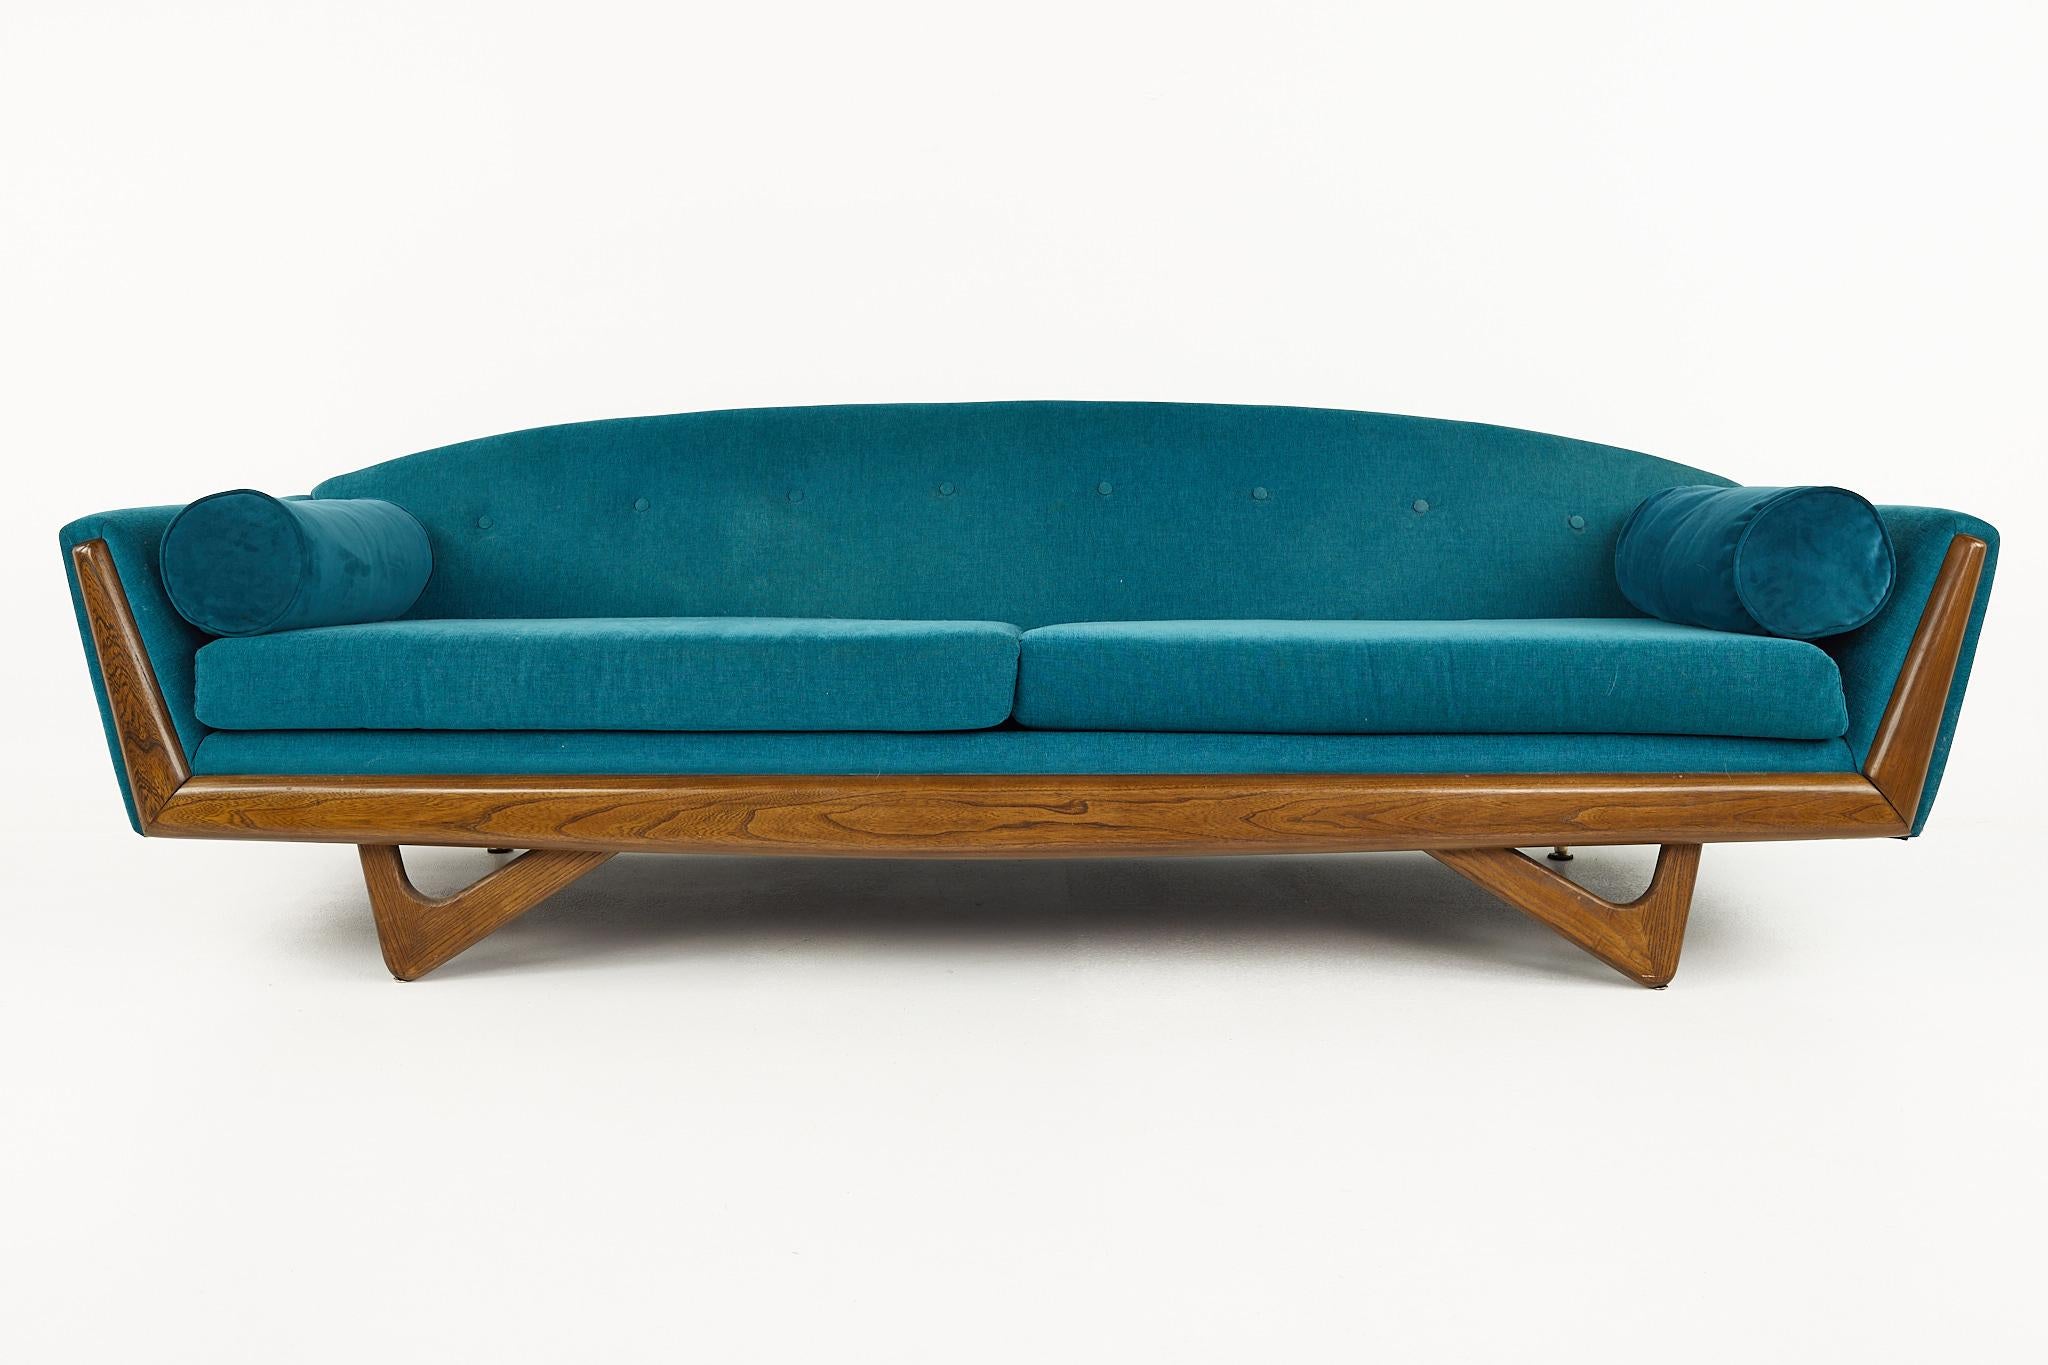 Adrian Pearsall style Kroehler mid century gondola sofa

The sofa measures: 93 wide x 33.5 deep x 27.25 high, with a seat height of 17.25 inches and arm height/chair clearance of 22.5 inches 

All pieces of furniture can be had in what we call